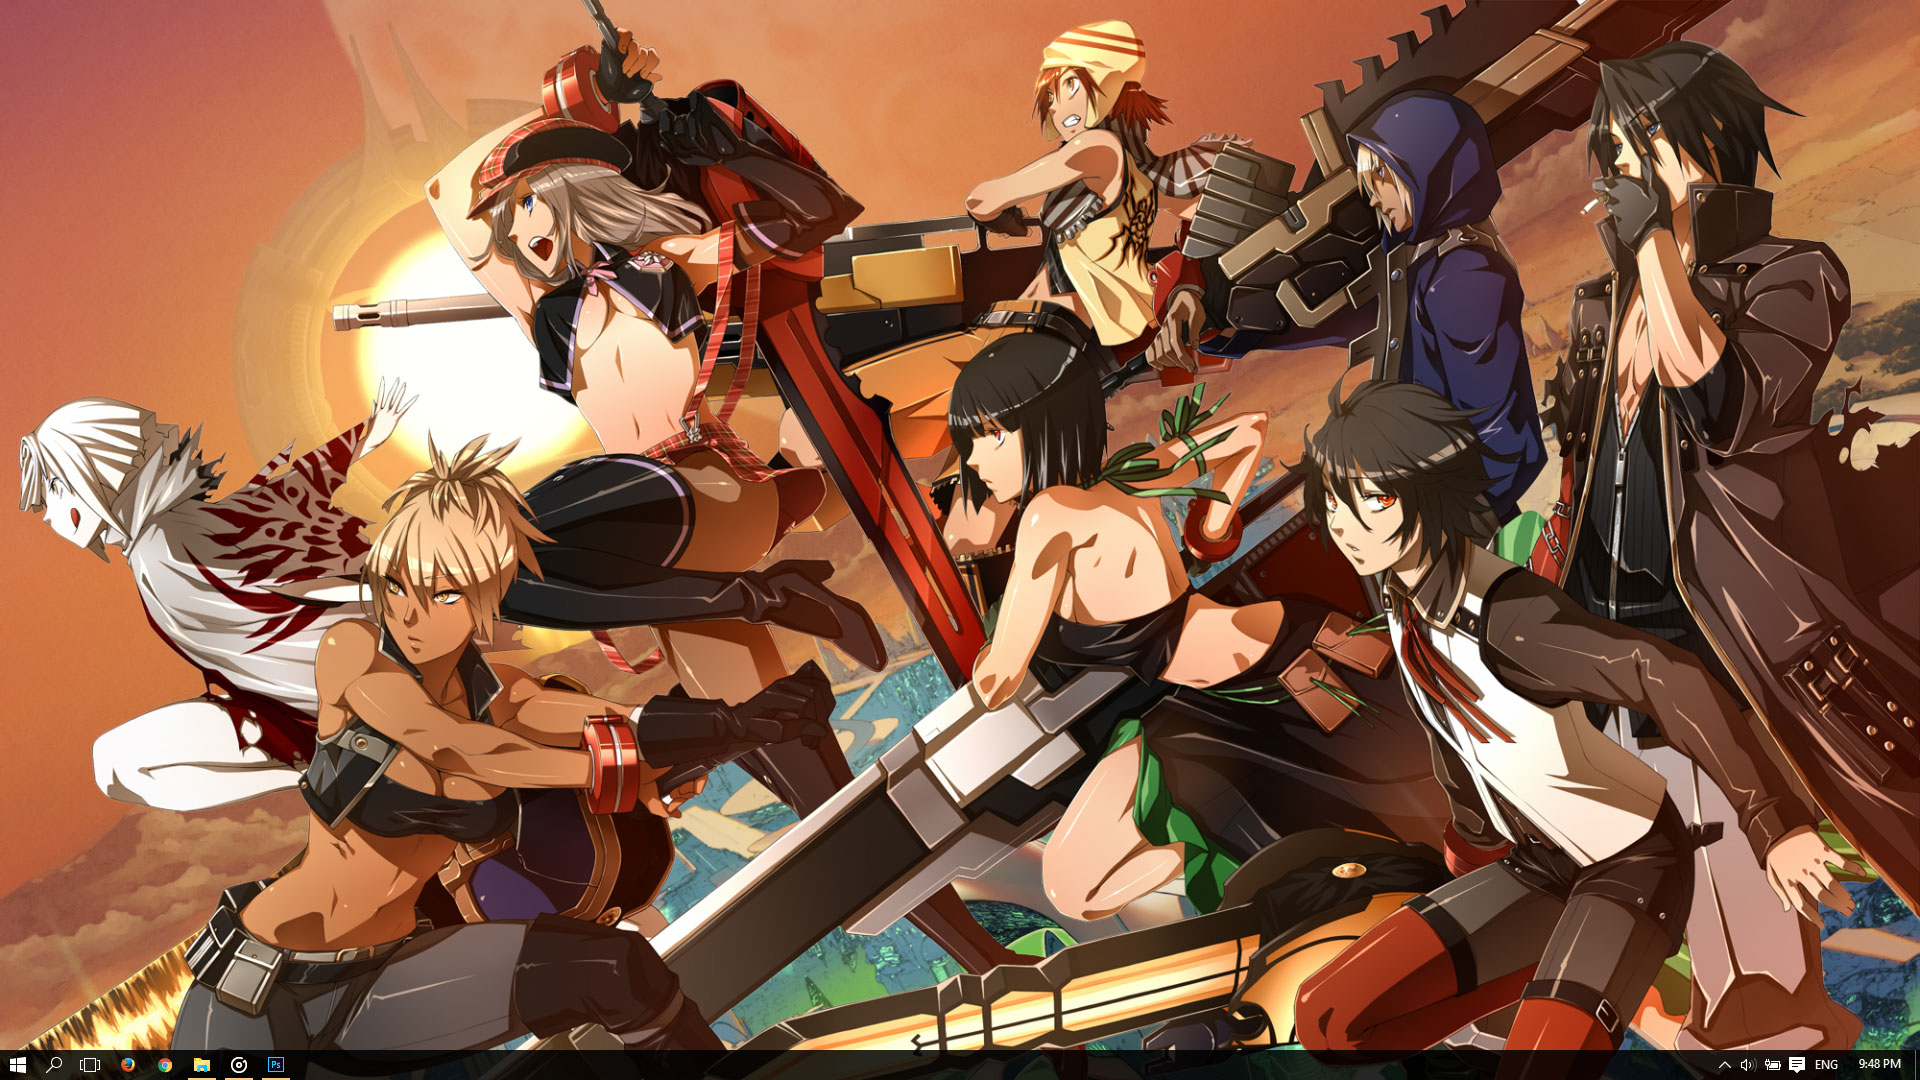 Using The God Arcs, All The Characters Together With - God Eater Anime Wallpaper Hd , HD Wallpaper & Backgrounds